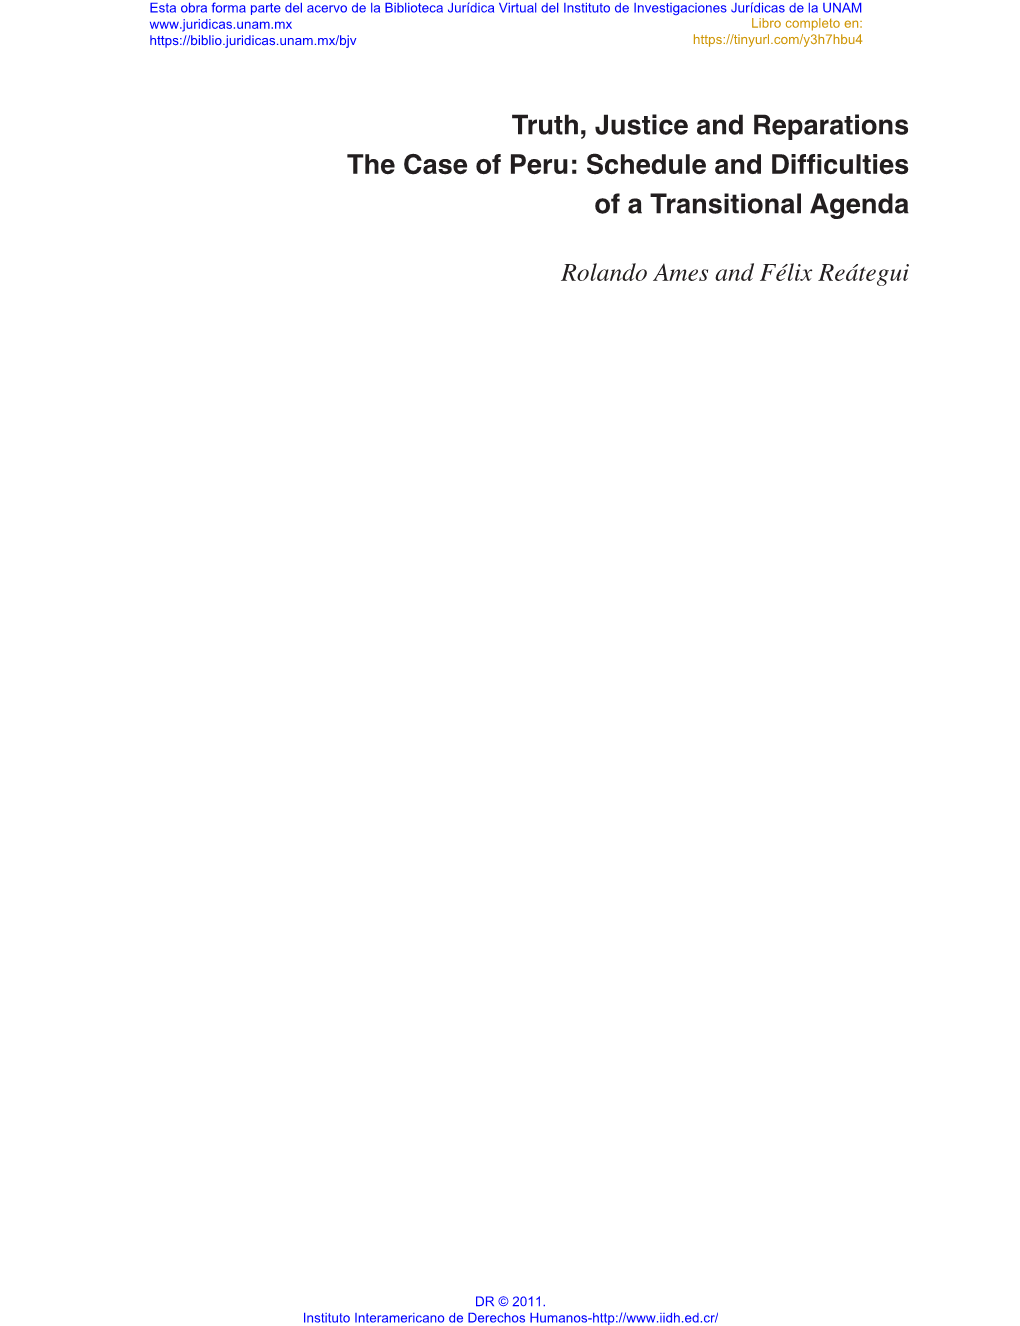 Truth, Justice and Reparations the Case of Peru: Schedule and Difficulties of a Transitional Agenda